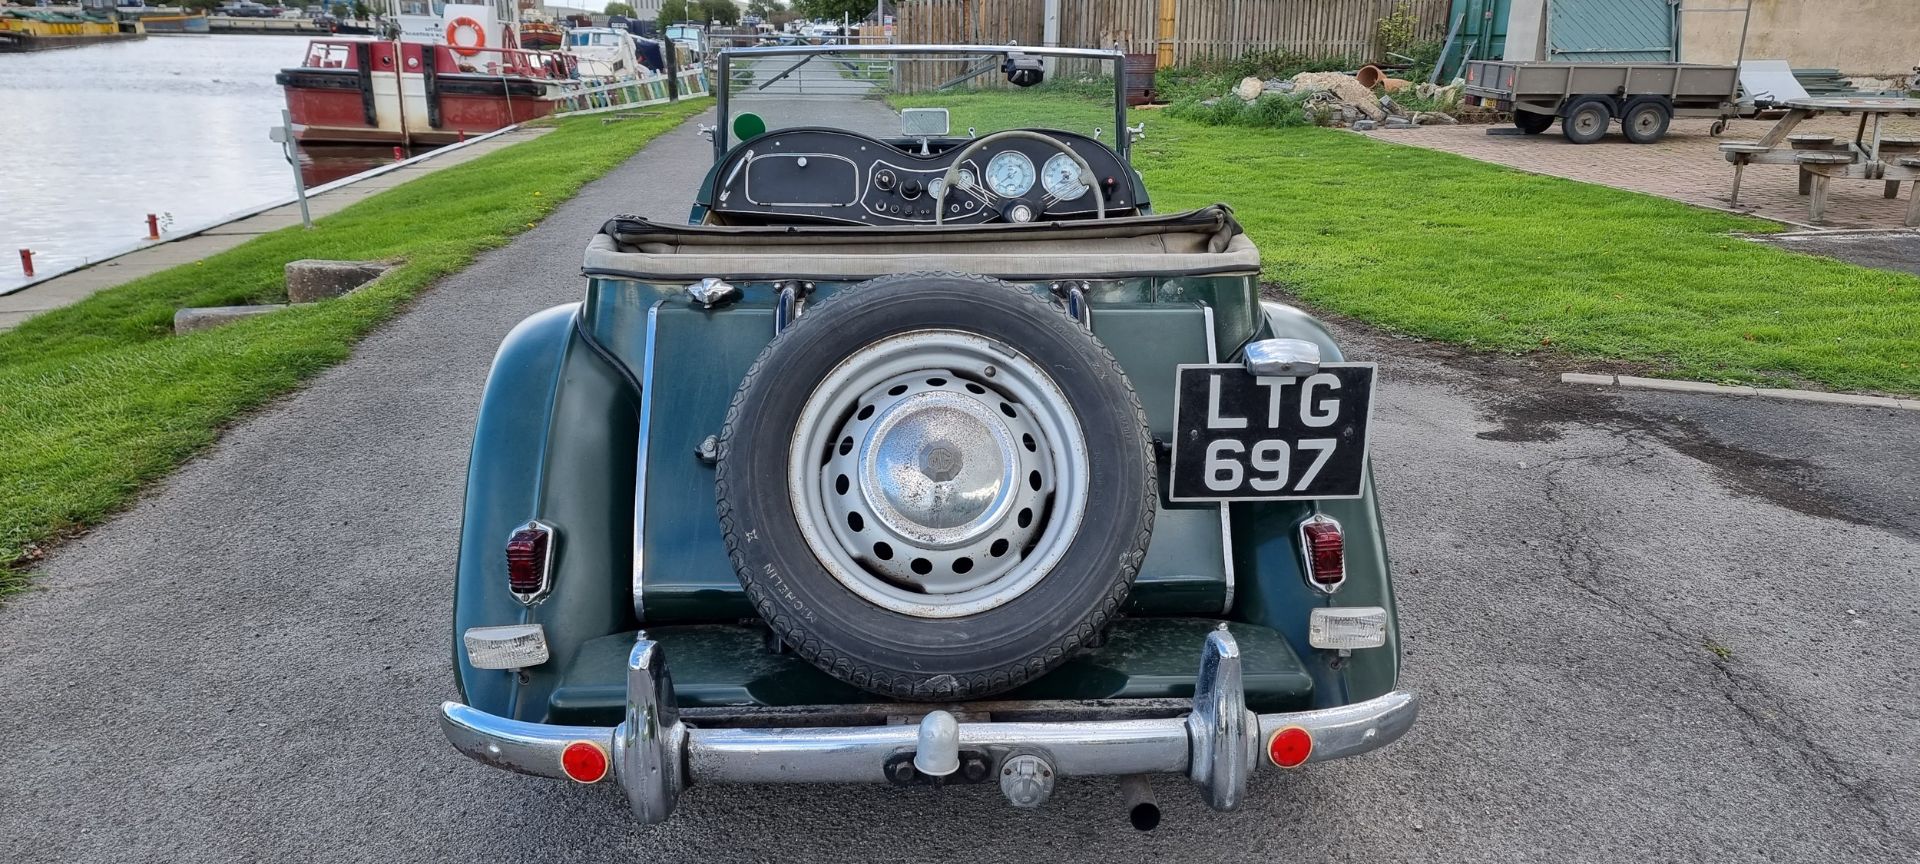 1952 MG TD, 1250cc. Registration number LTG 697. Chassis number TD 126630. Body Type 22381 Body - Image 7 of 20